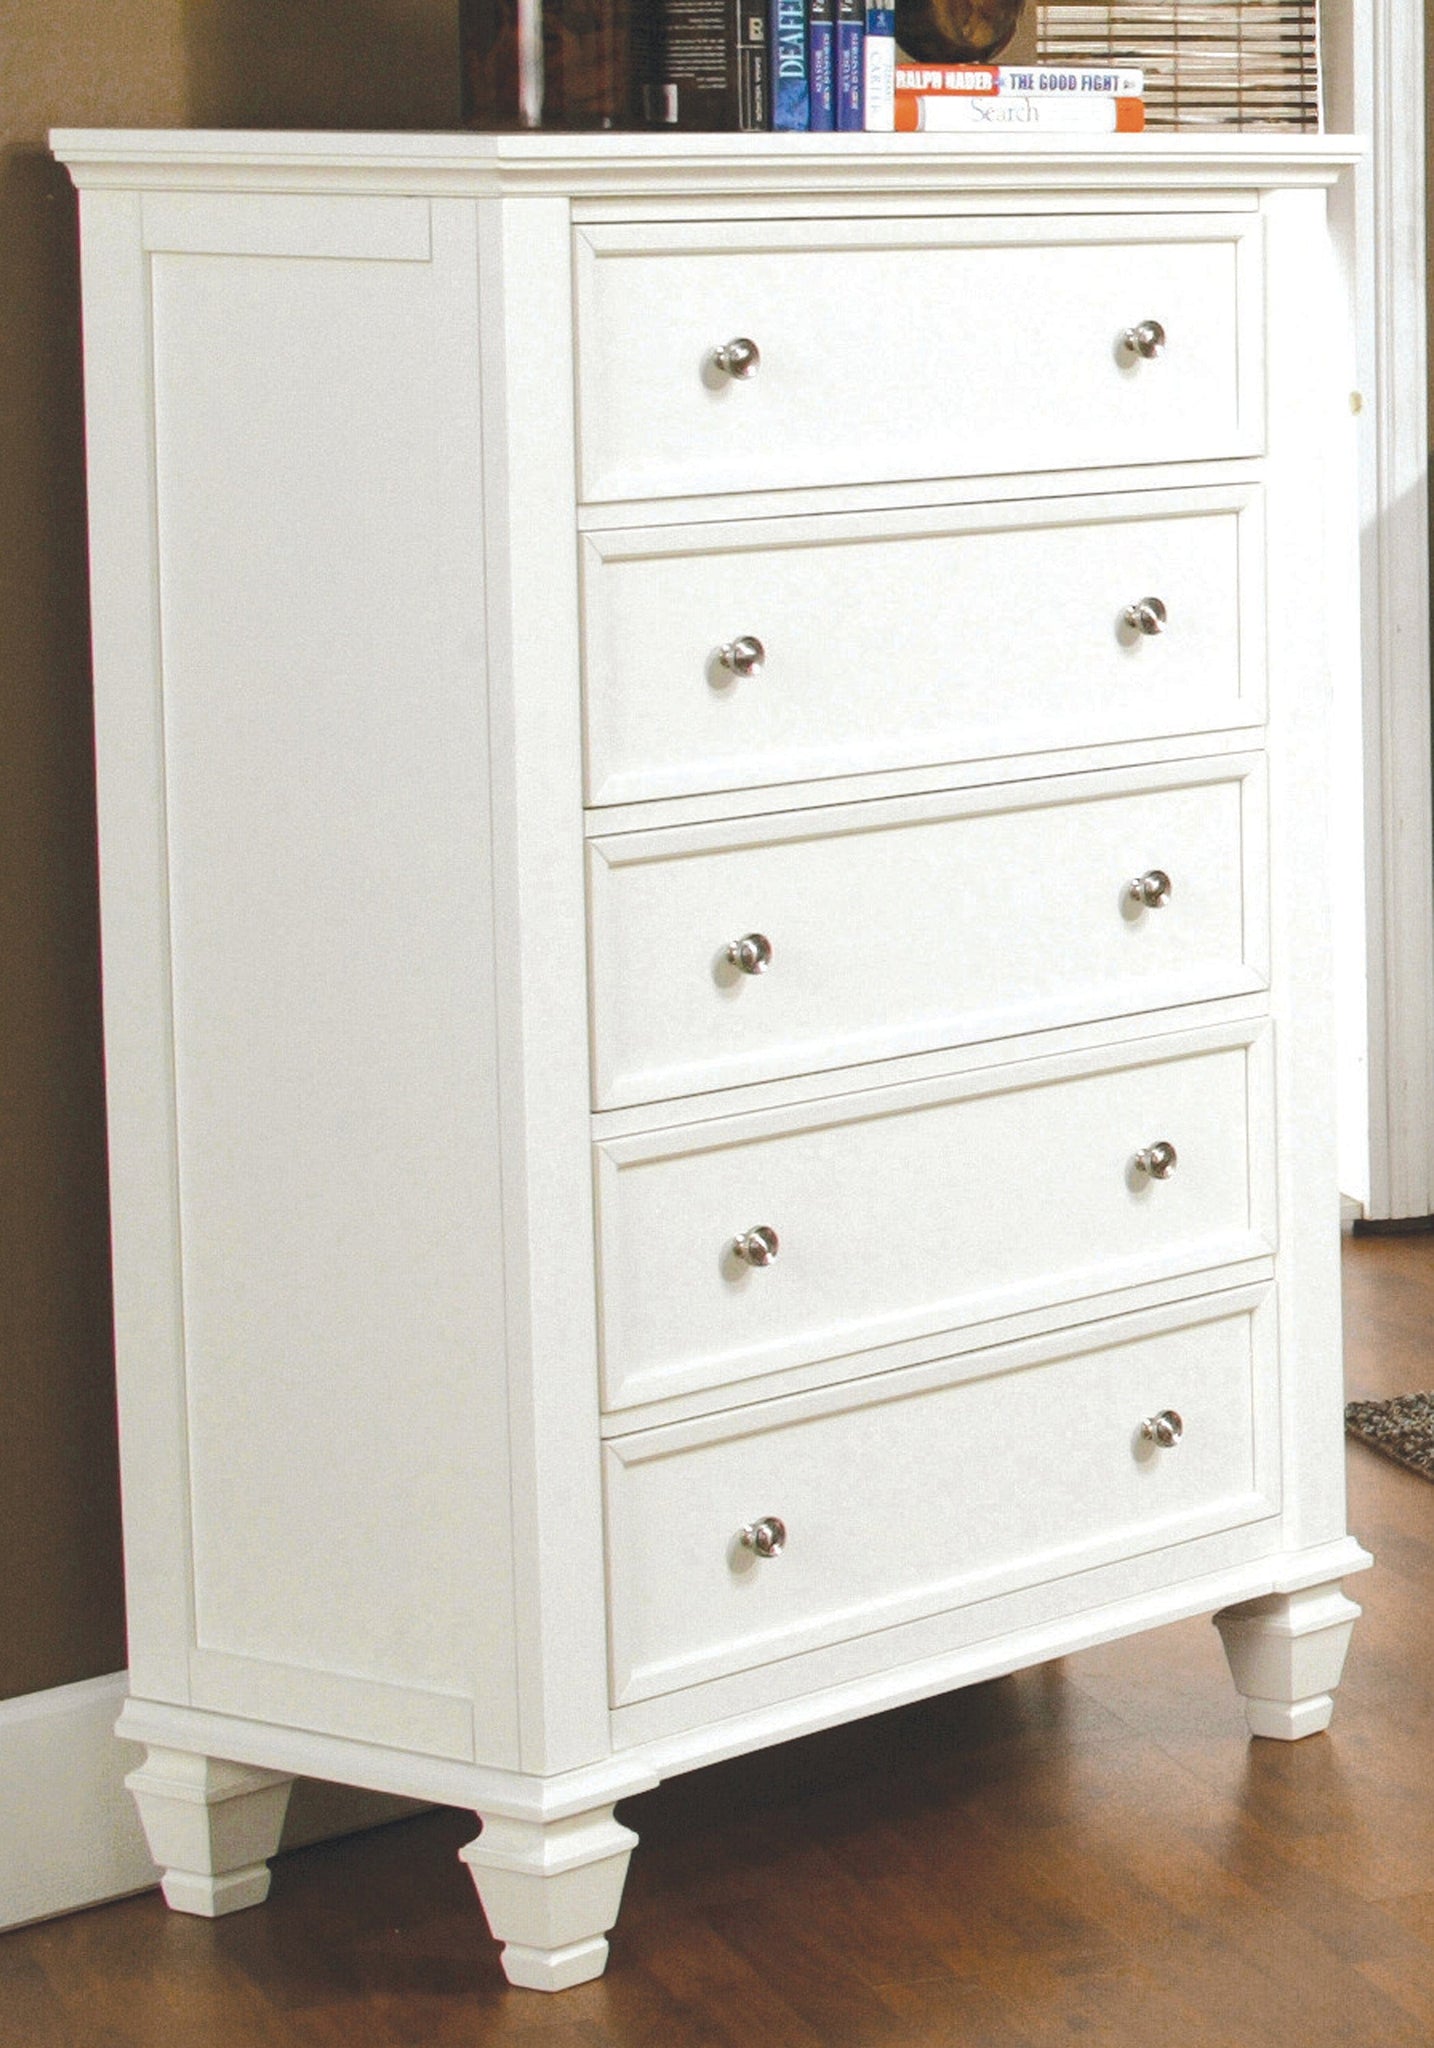 Sandy Beach 5-Drawer Rectangular Chest White Collection: Chest Features Five Roomy Drawers With Plenty Of Storage For Foldable Clothes As Well As Extra Bed Linens. Broad Top Wide Enough For Lamp And A Collection Of Books.  SKU: 201305